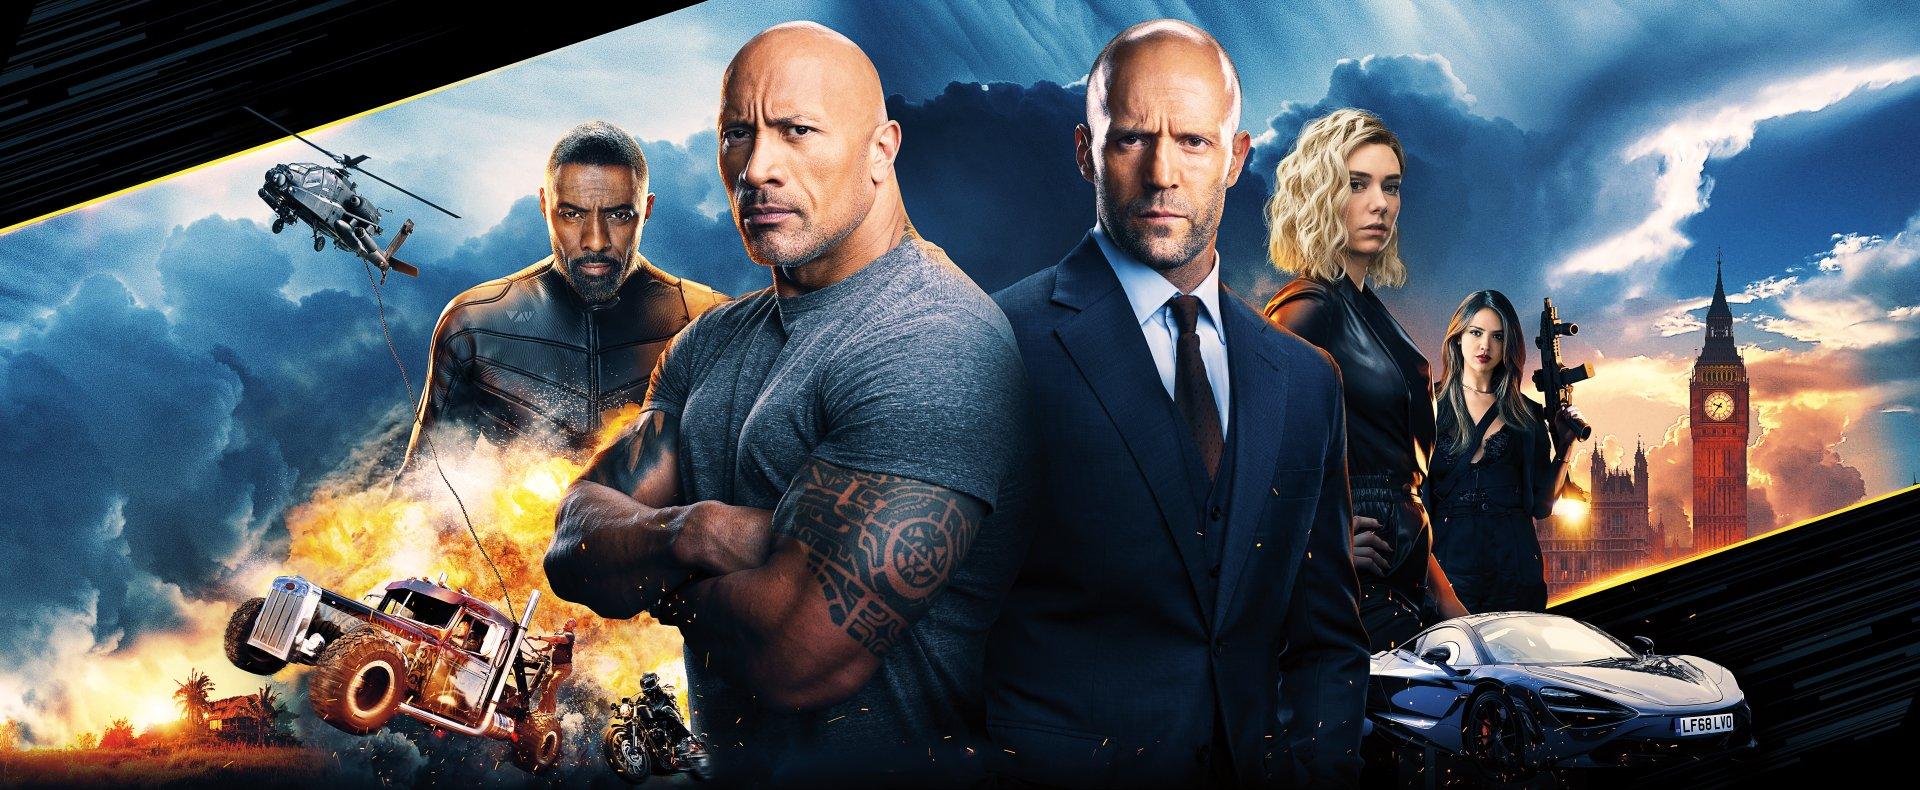 Fast & Furious Presents: Hobbs & Shaw HD Wallpaper and Background Image